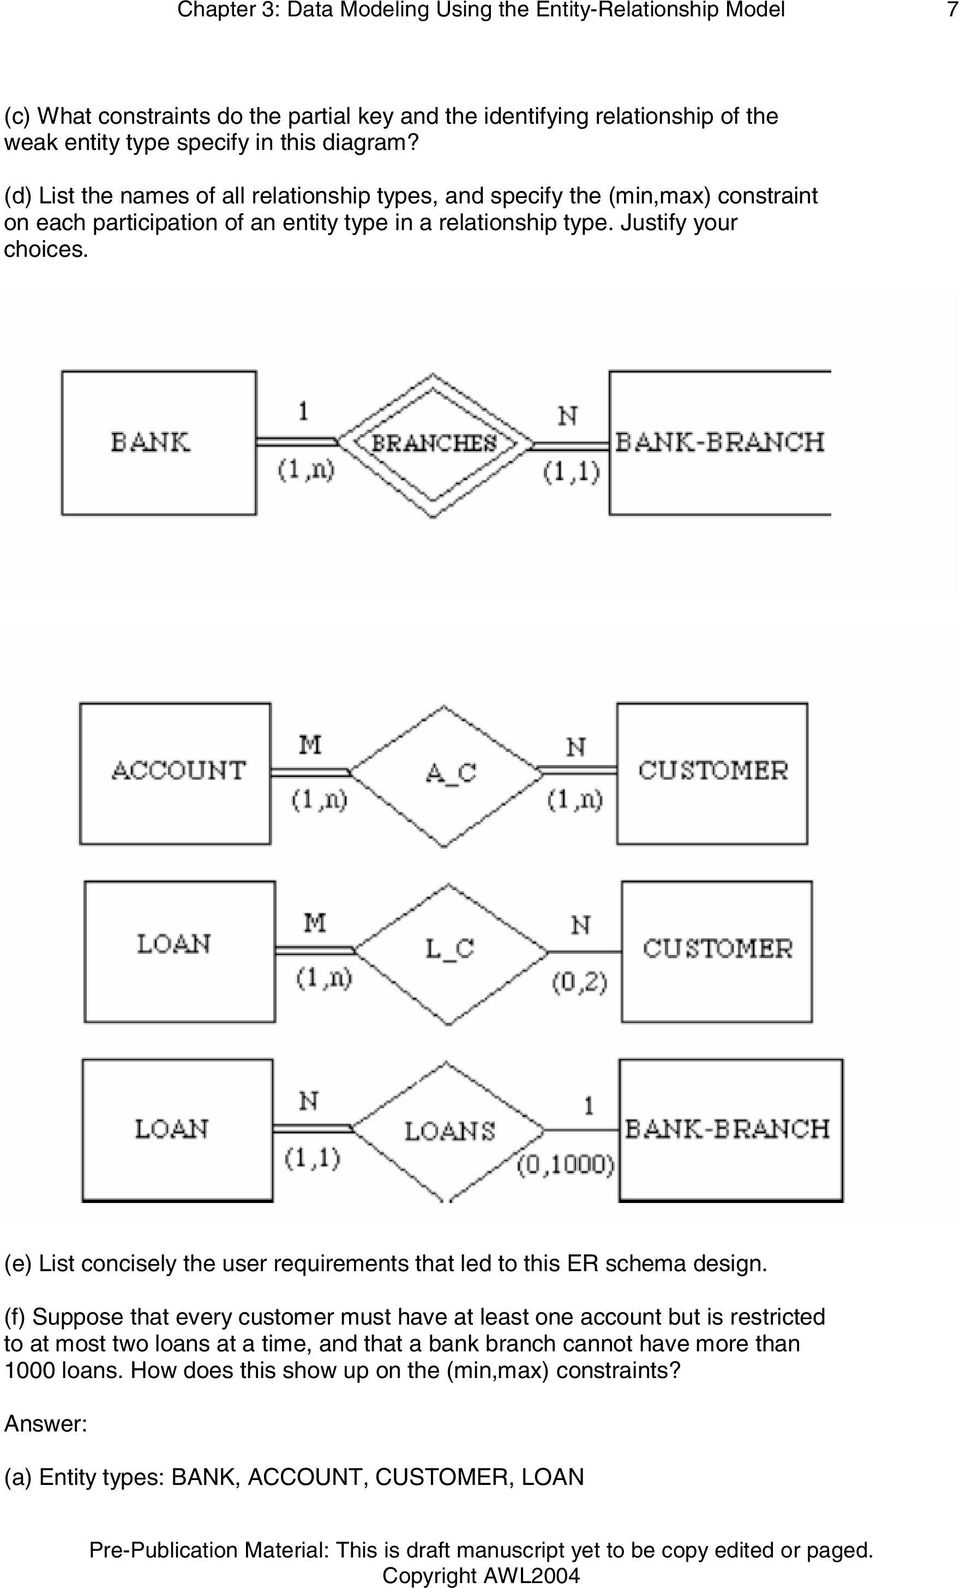 Chapter 3: Data Modeling Using The Entity-Relationship Model with regard to Er Diagram Relationship Types